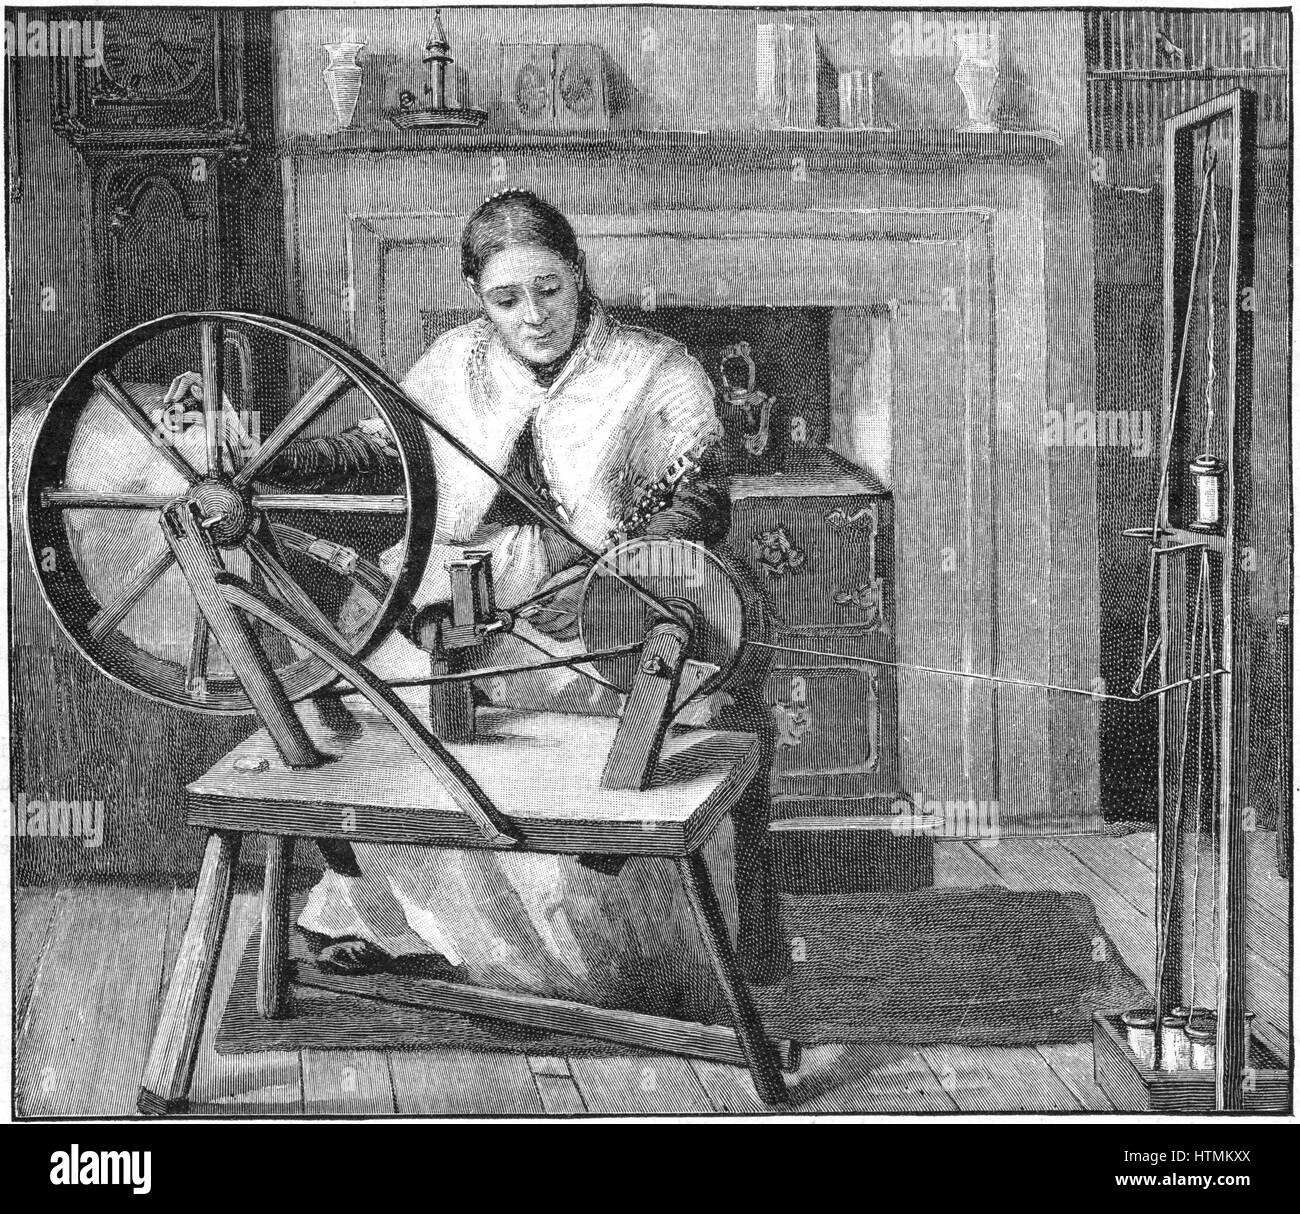 Spitalfields silk worker winding silk in her cottage, London, England, late 19th century. This enclave of the silk industry was founded by Huguenot refugees from France after Louis XIV's Revocation of the Edict of Nantes (1685). Engraving, 1893 Stock Photo